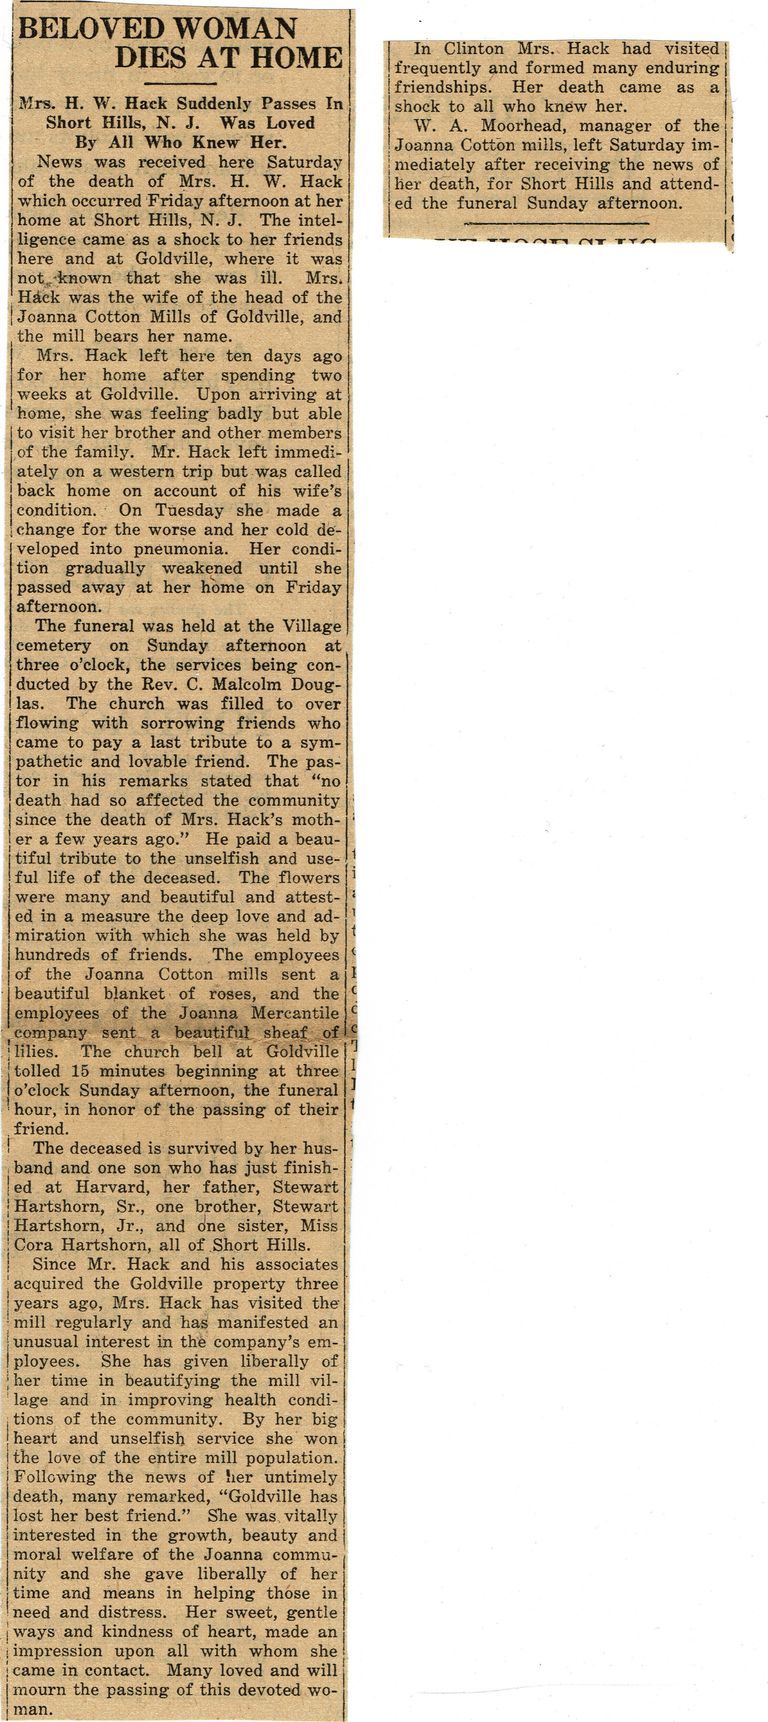          Hack: Joanna Hack Obituary, Clinton Chronicle, 1927 picture number 1
   